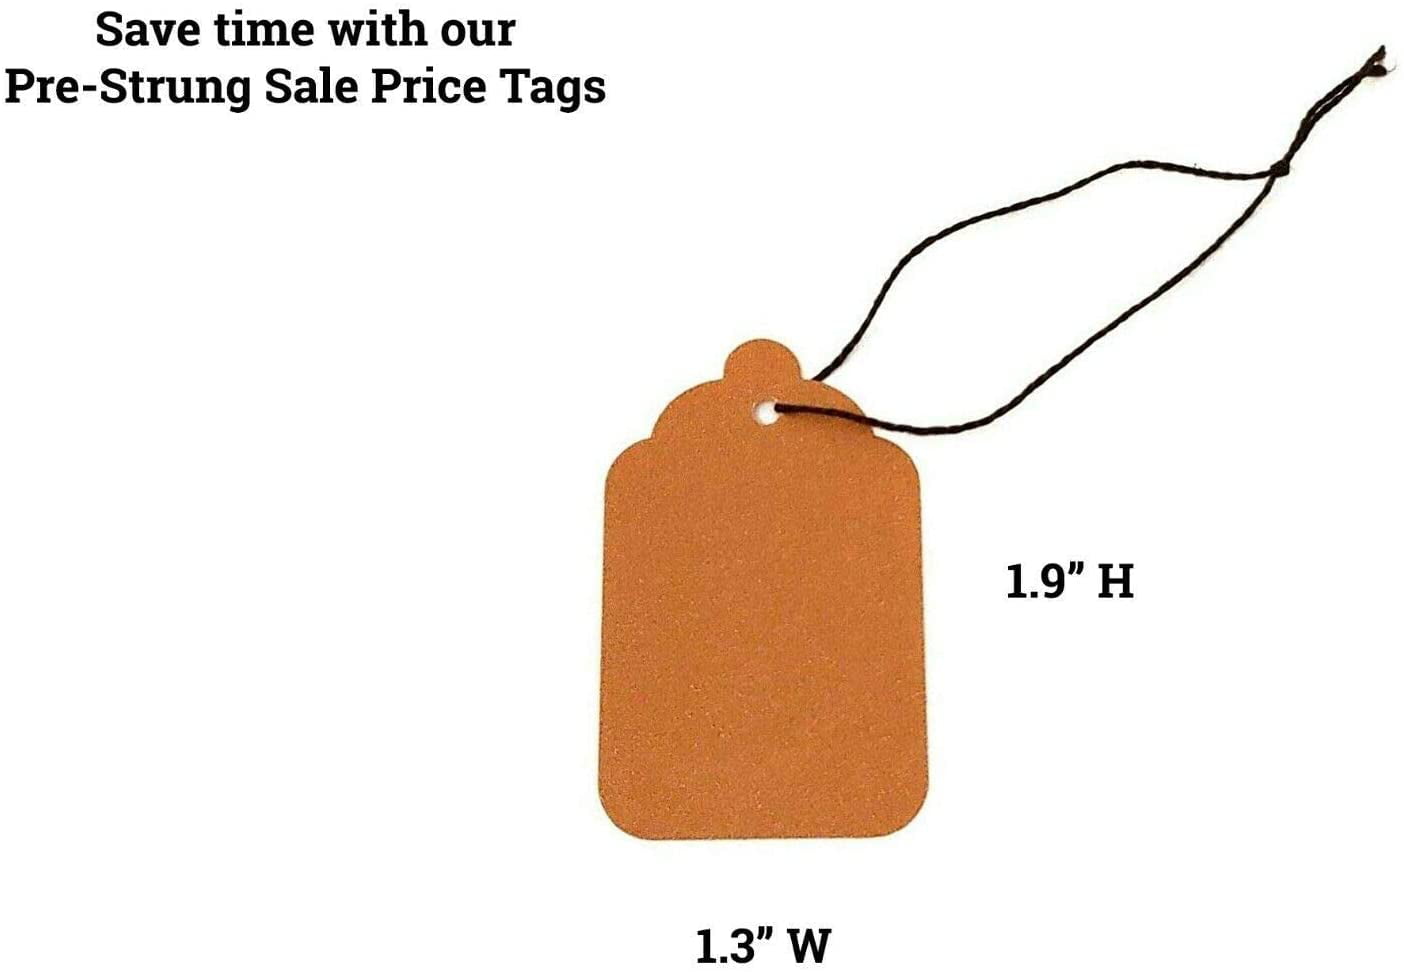 700 Pcs Jewelry Price Tags Brown Gift Tags with String for Christmas  Jewelry Tags for Pricing Tags Name Tags for Gift Bags